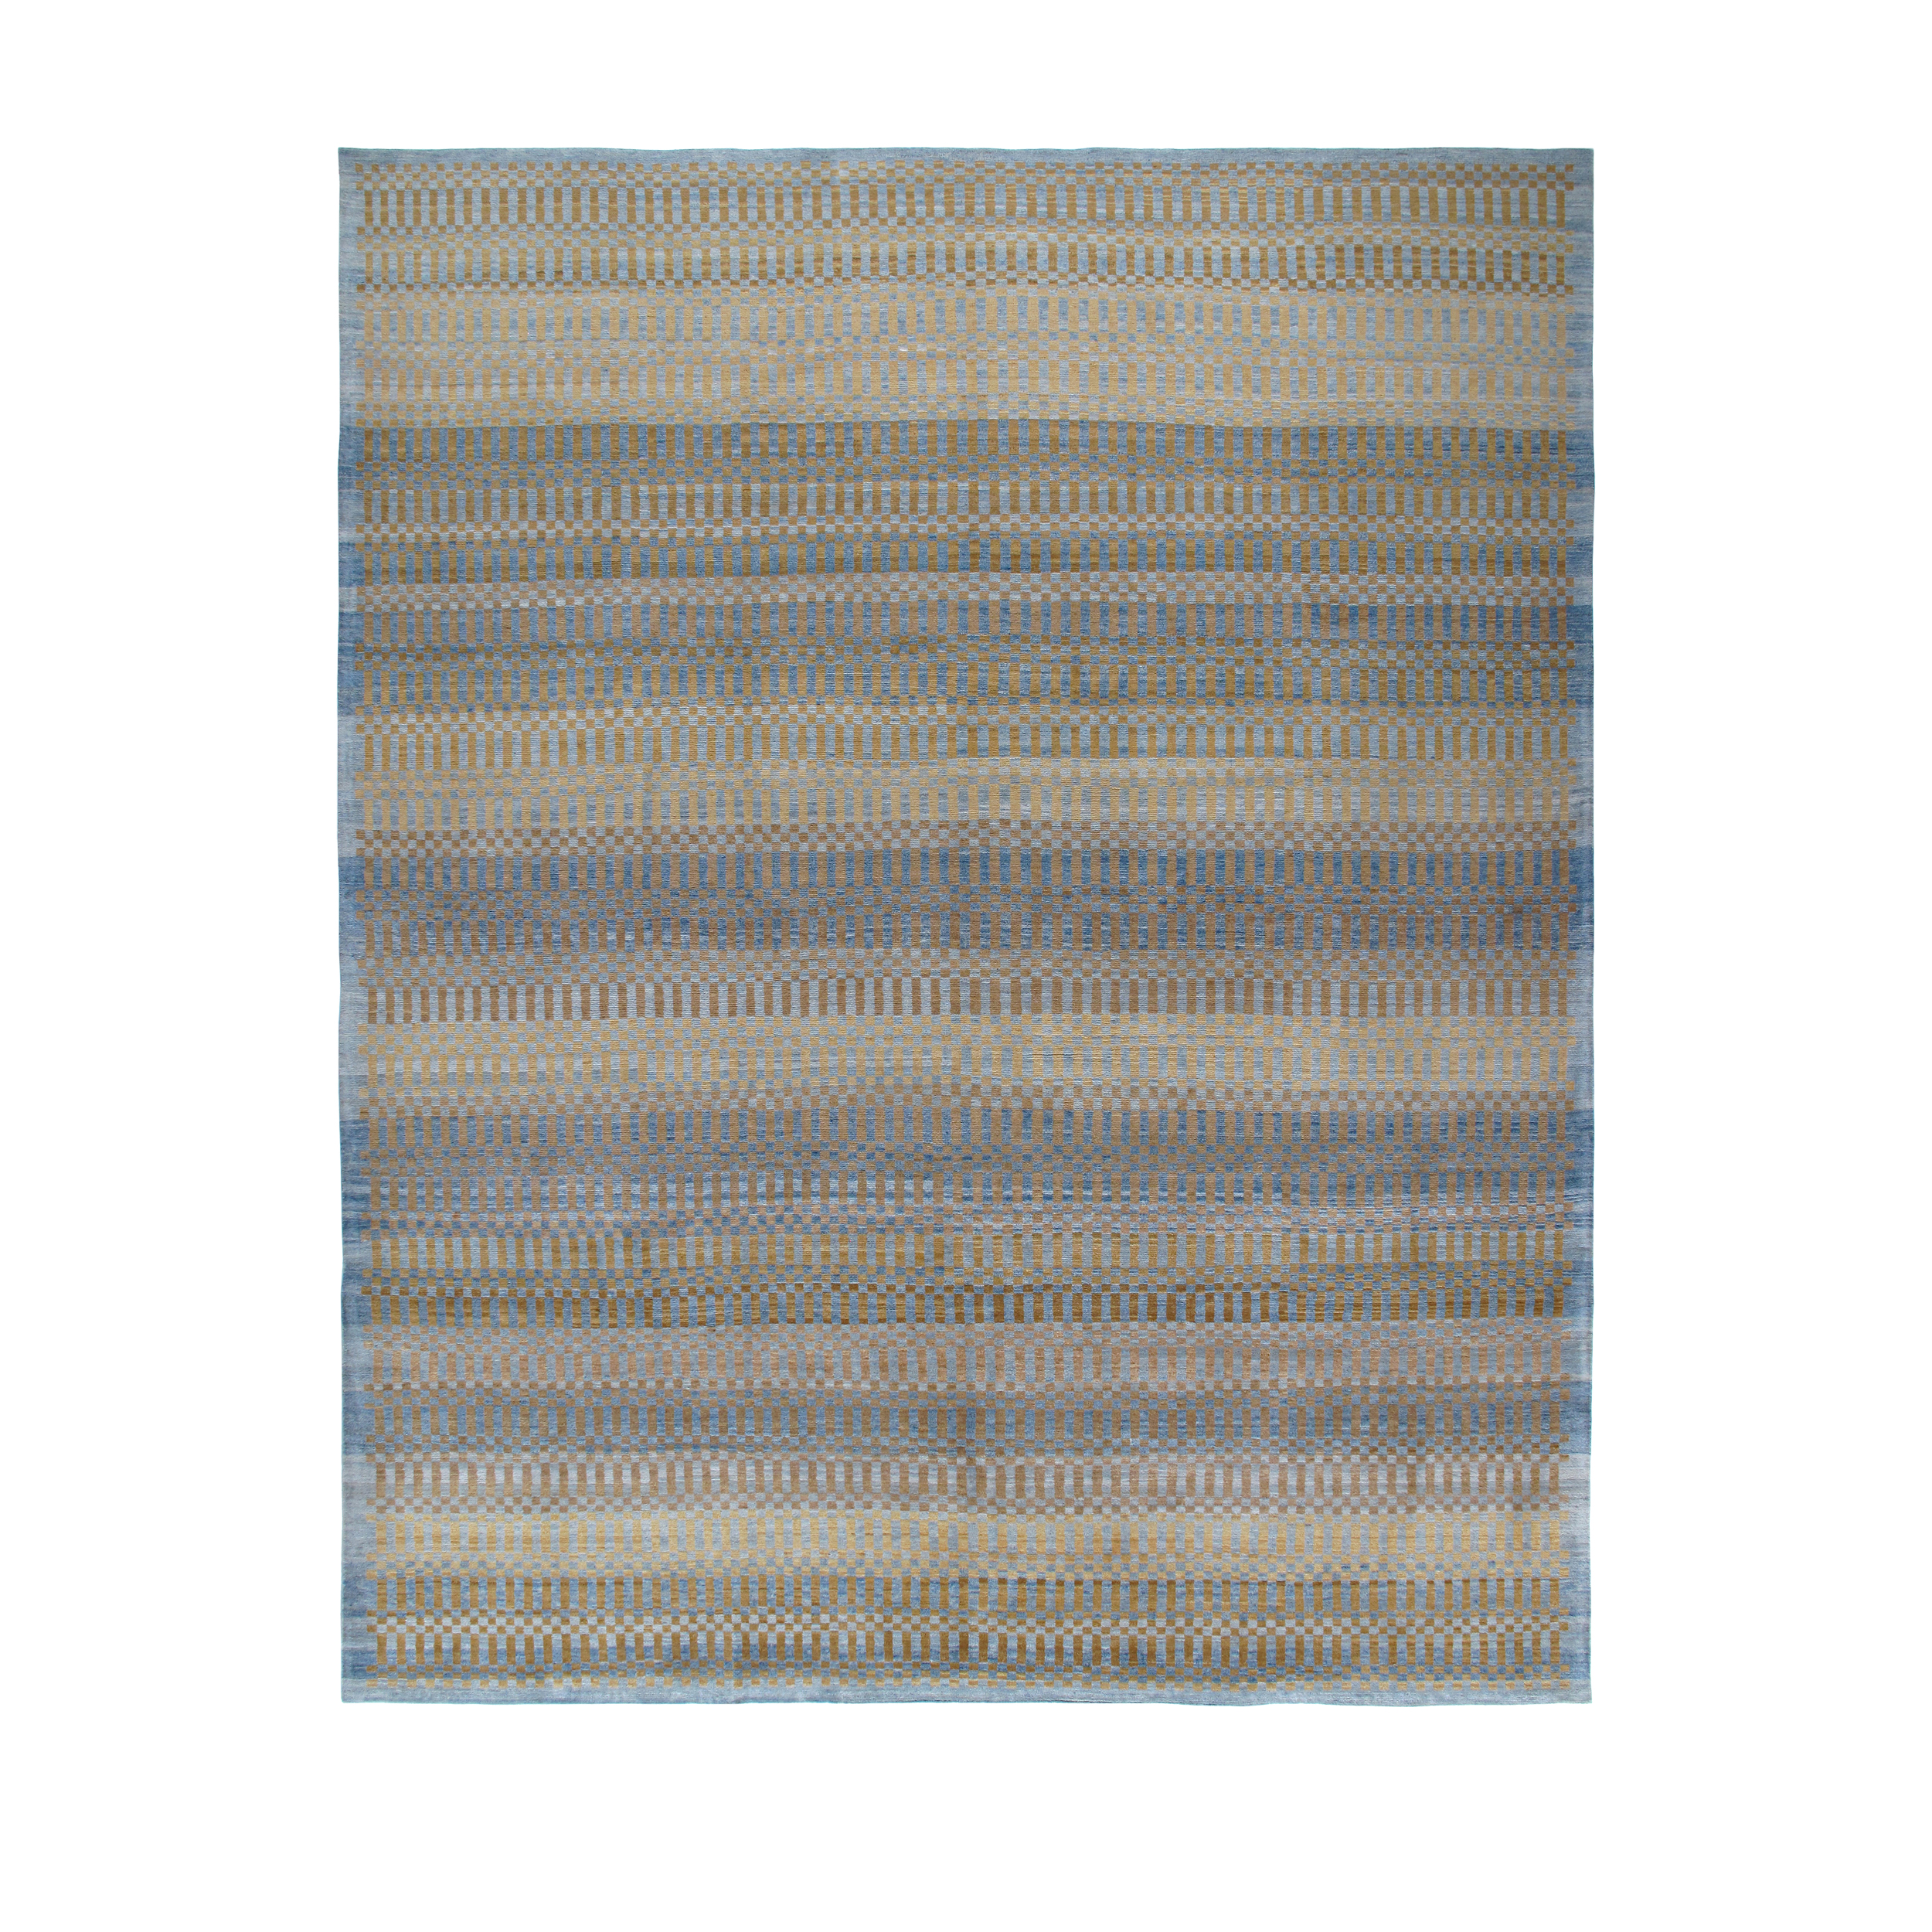 This Modern Shiraz rug is hand-knotted and made of 100% wool.